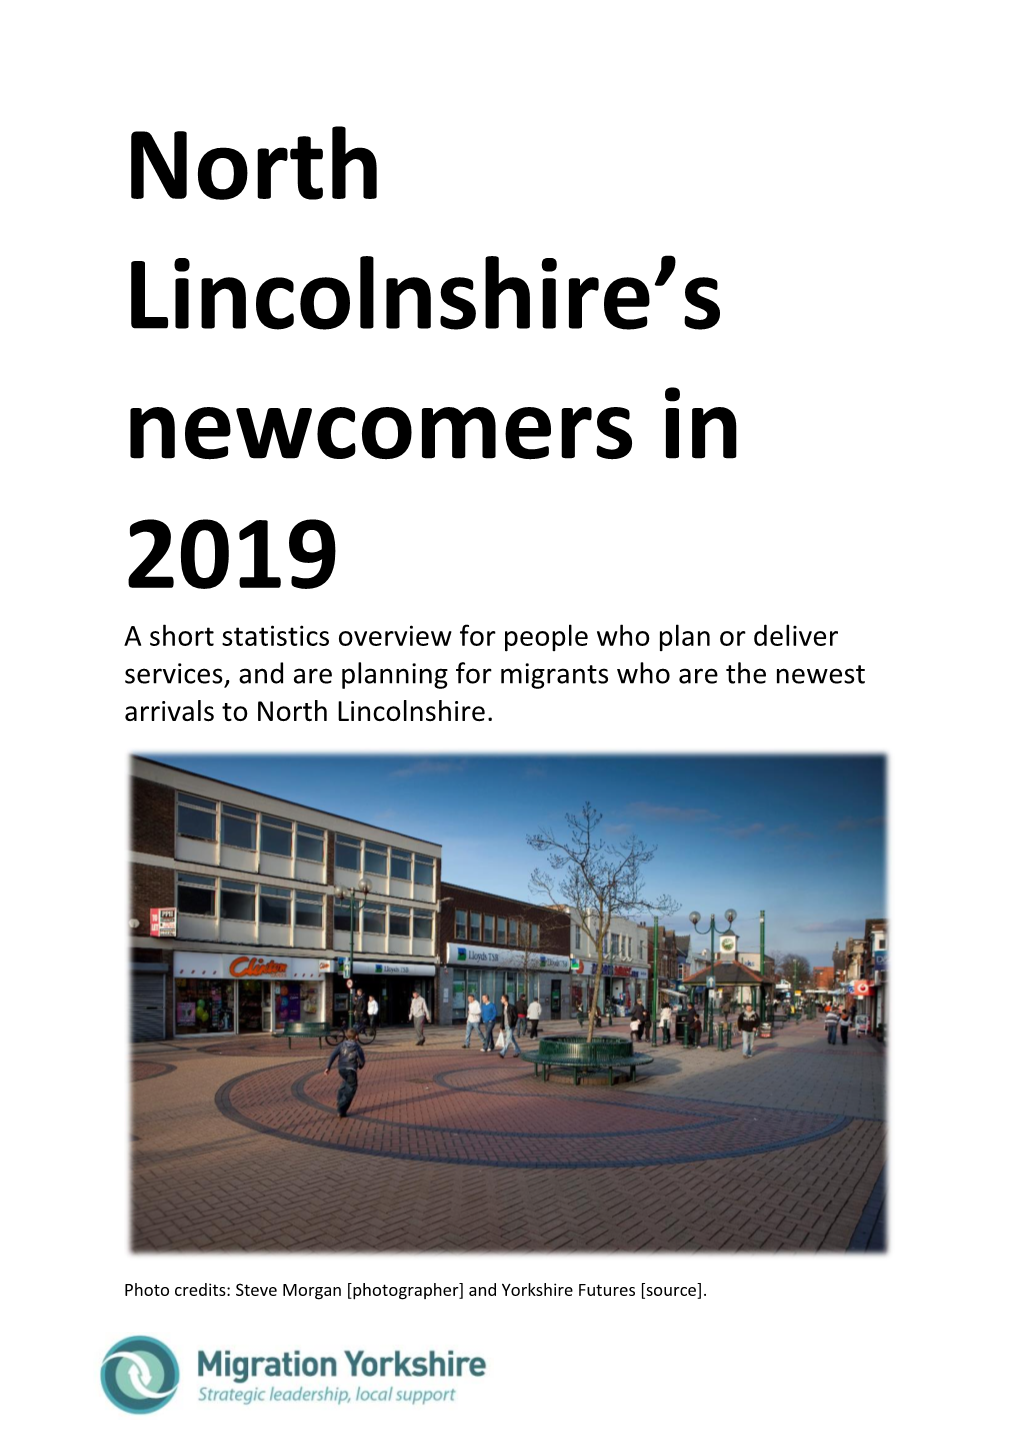 North Lincolnshire's Newcomers in 2019